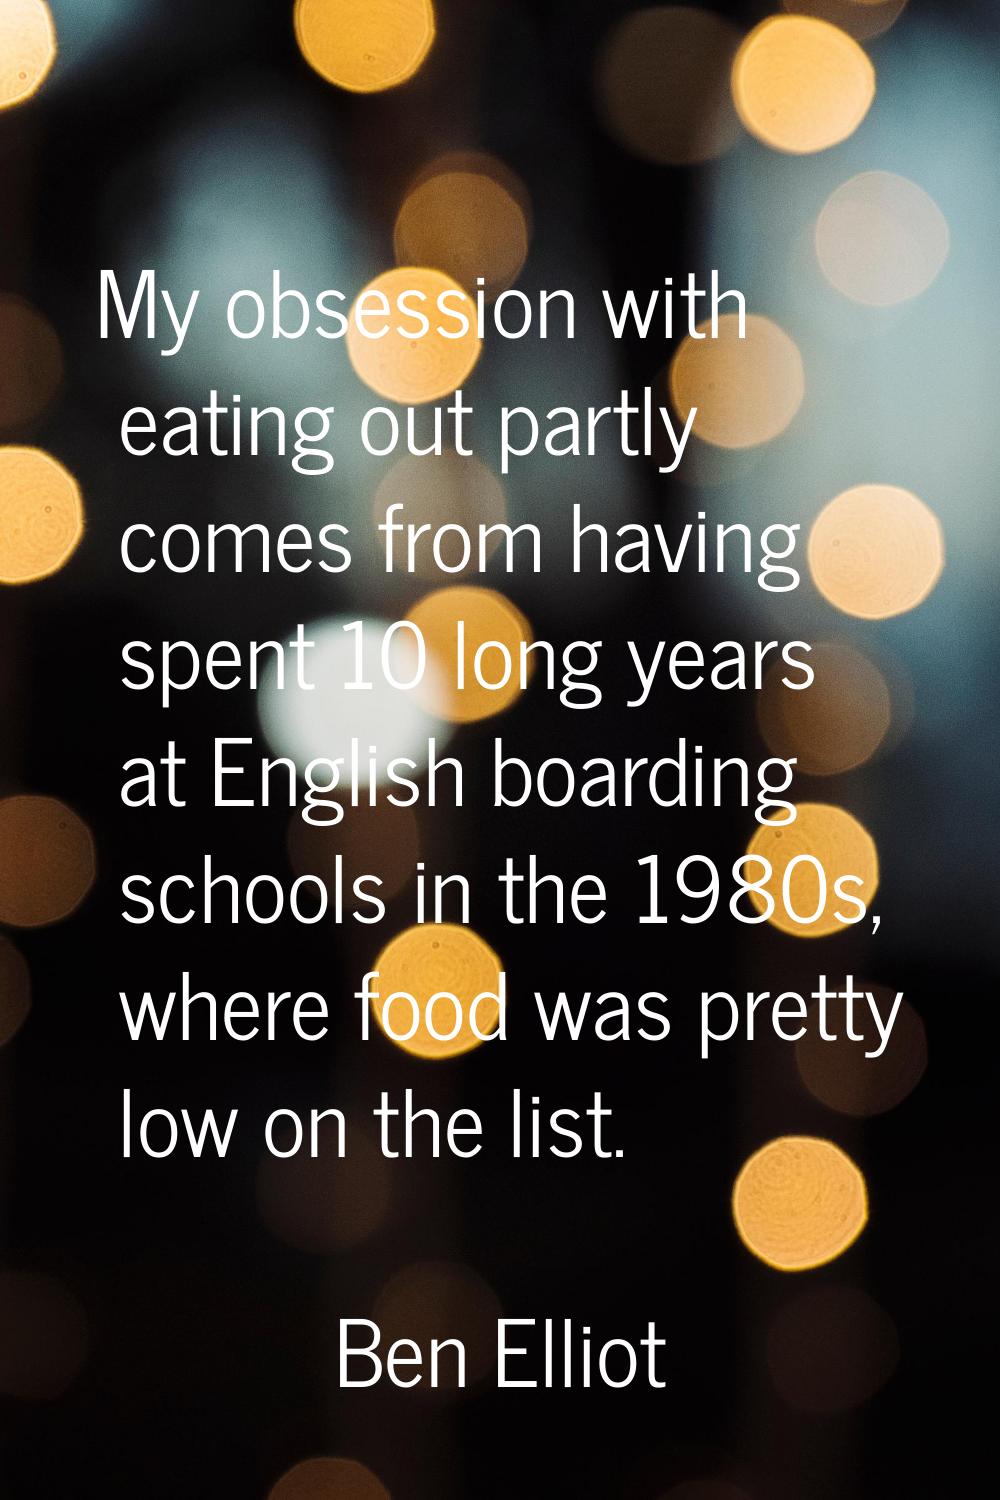 My obsession with eating out partly comes from having spent 10 long years at English boarding schoo